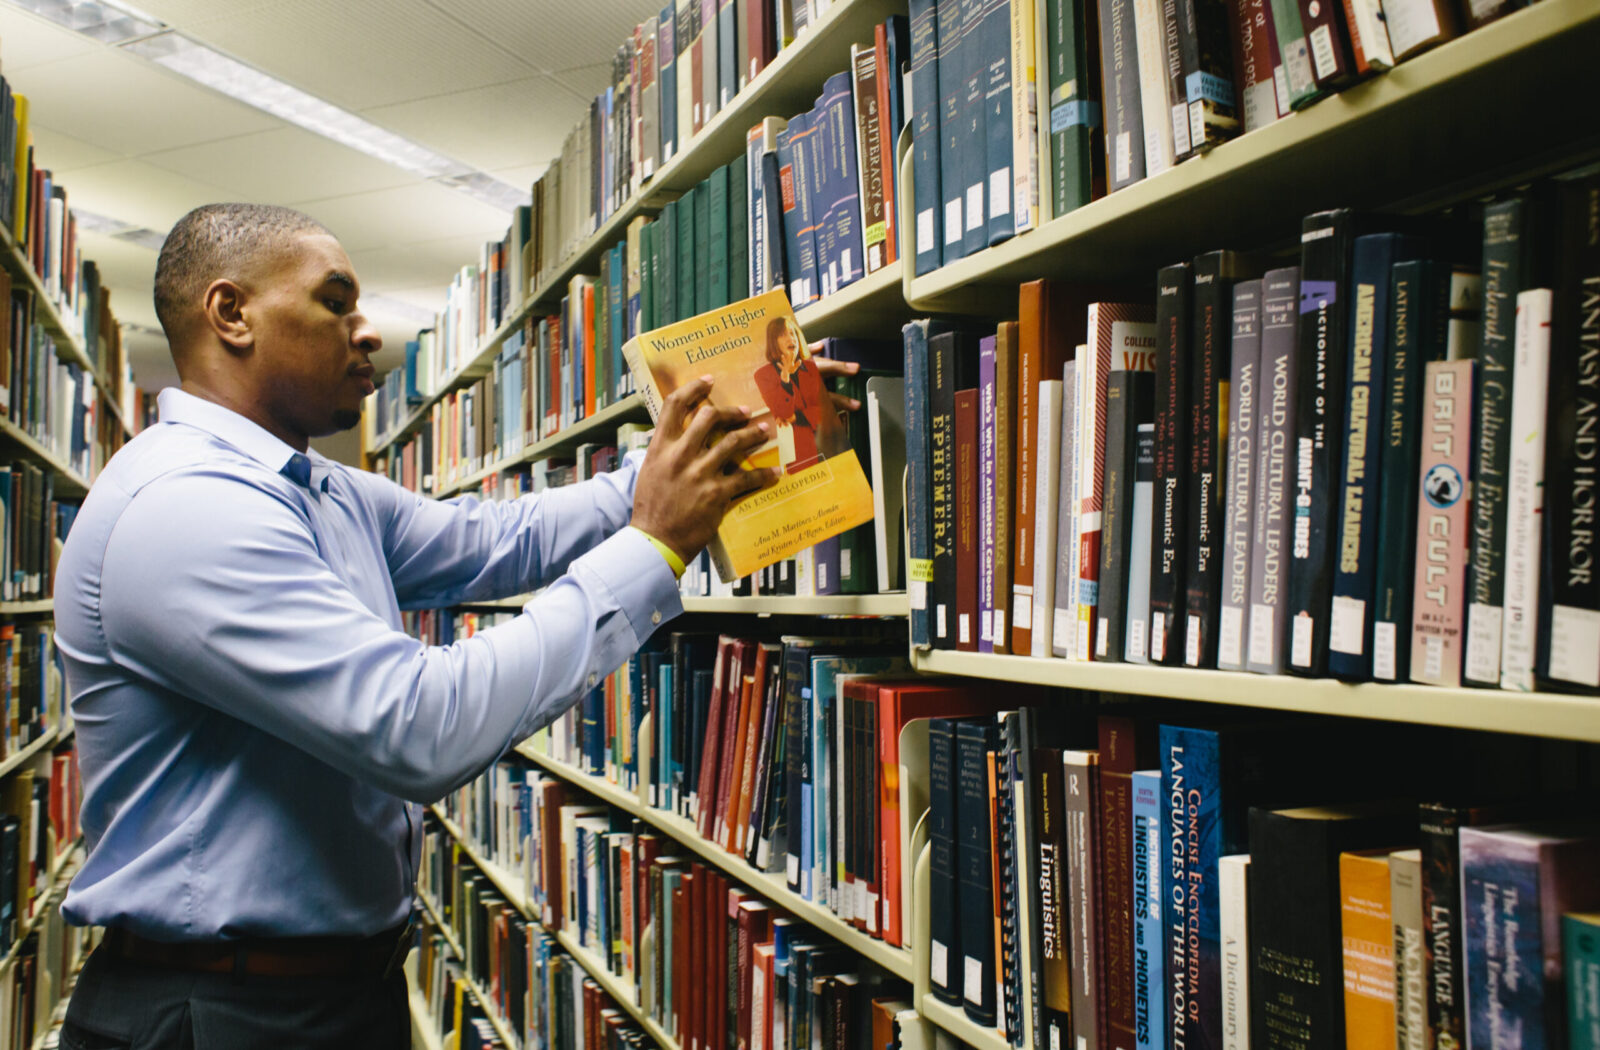 Male placing book on library shelf